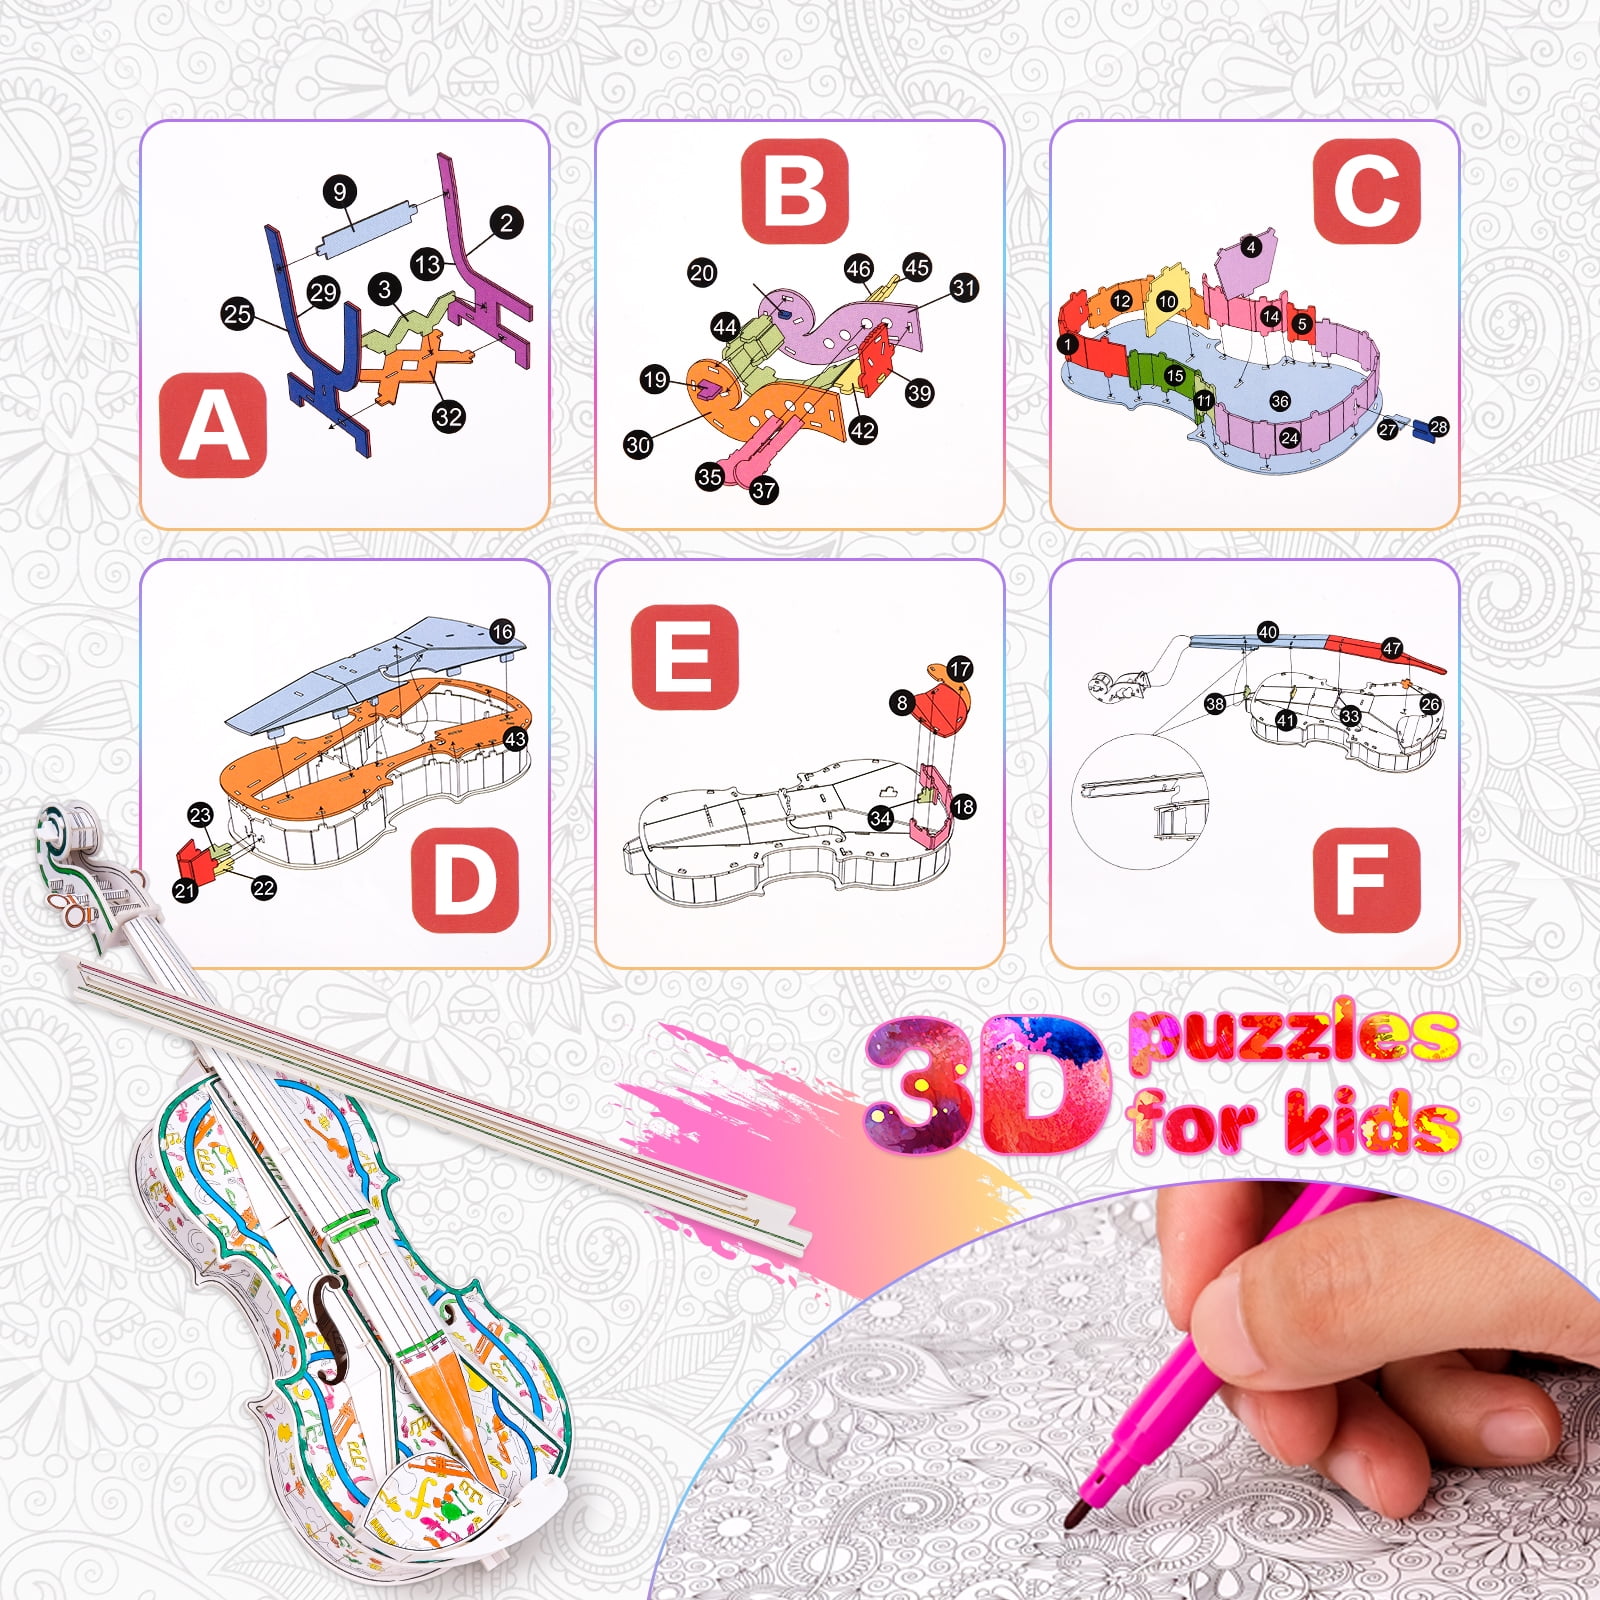 Dream Fun Drawing Kit for Kid Age 6 8 Gift for Girl Age 9 Arts and Crafts  for Boys Age 10-12, Coloring Puzzle Art Set for 8-12 Year Old Kids 3D Pens